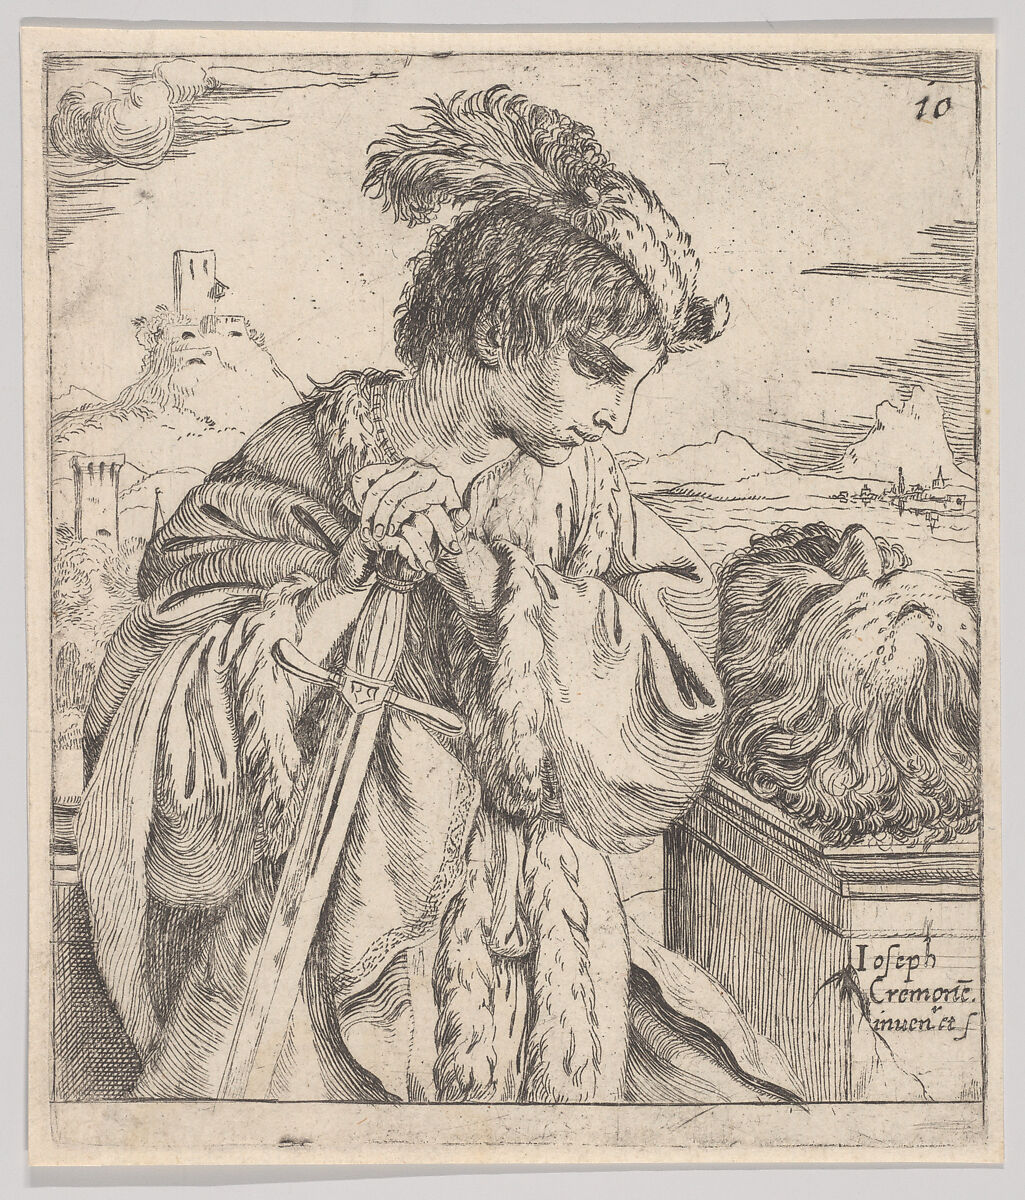 David looking at the head of Goliath, Giuseppe Caletti, called Cremonese (Italian, active Ferrara, 1600–1660), Etching 